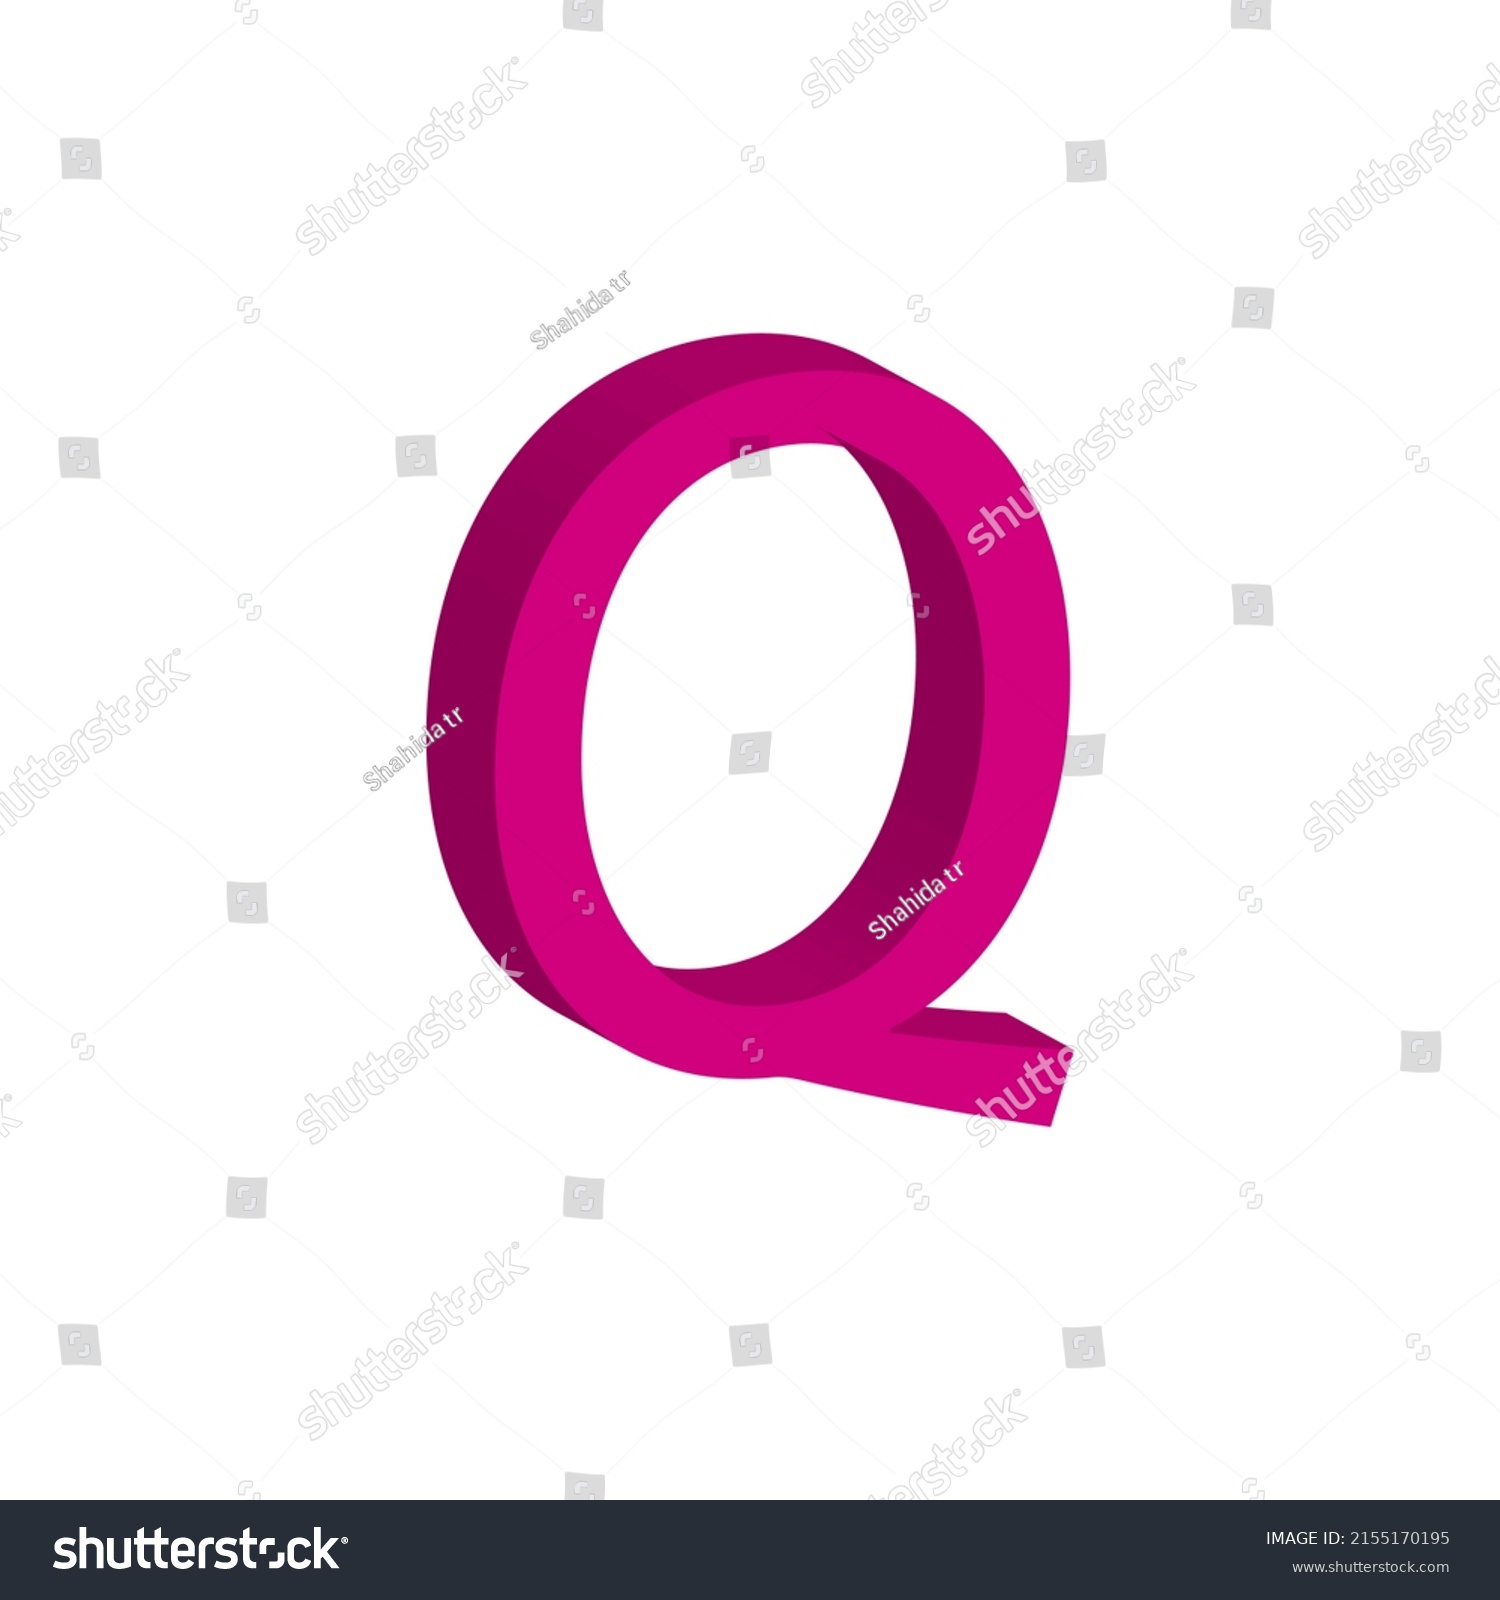 Rose Letter Q Uppercase 3d Vector Stock Vector (Royalty Free ...